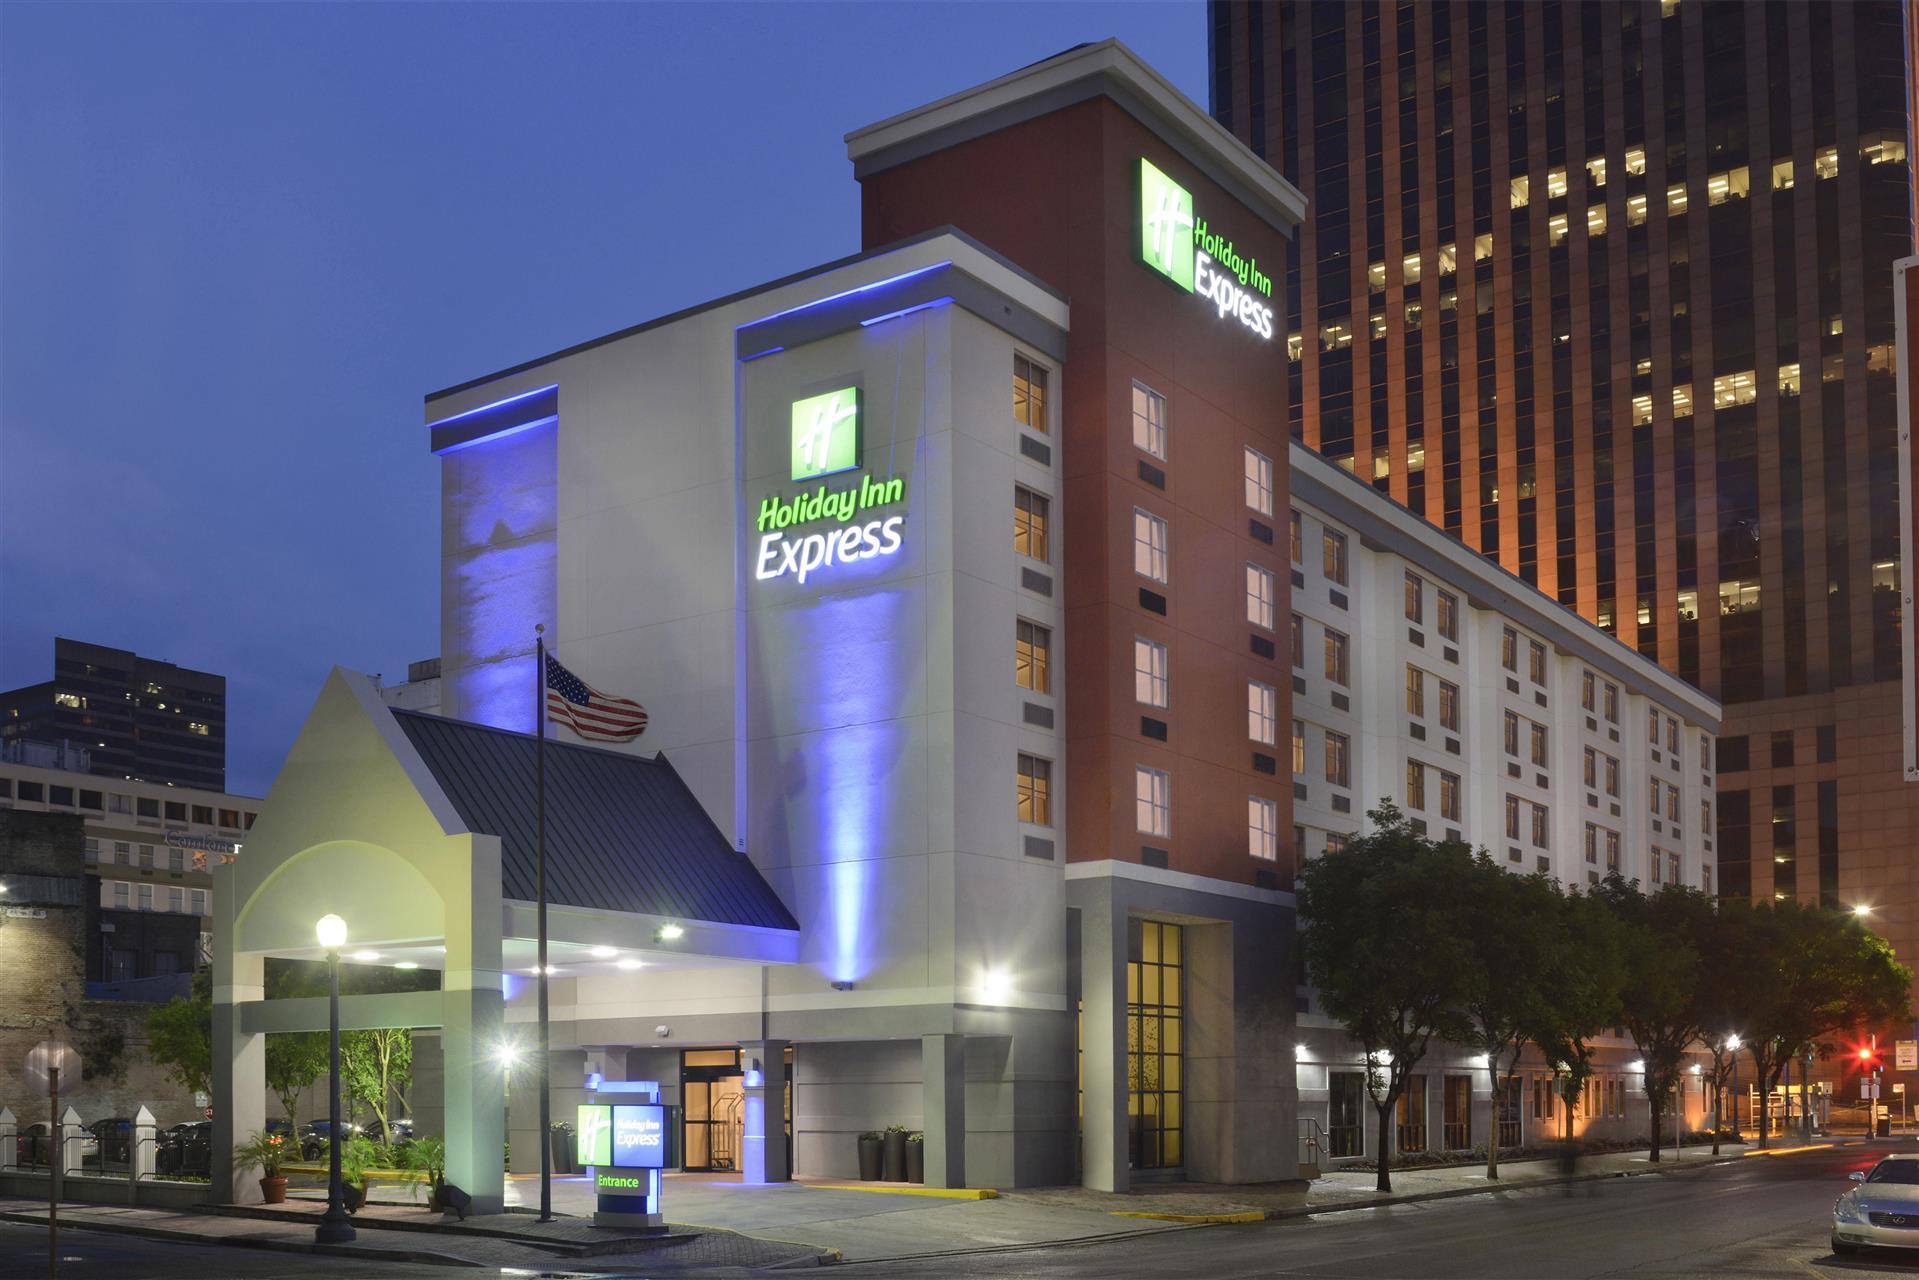 Holiday Inn Express New Orleans Downtown French Quarter Area in New Orleans, LA